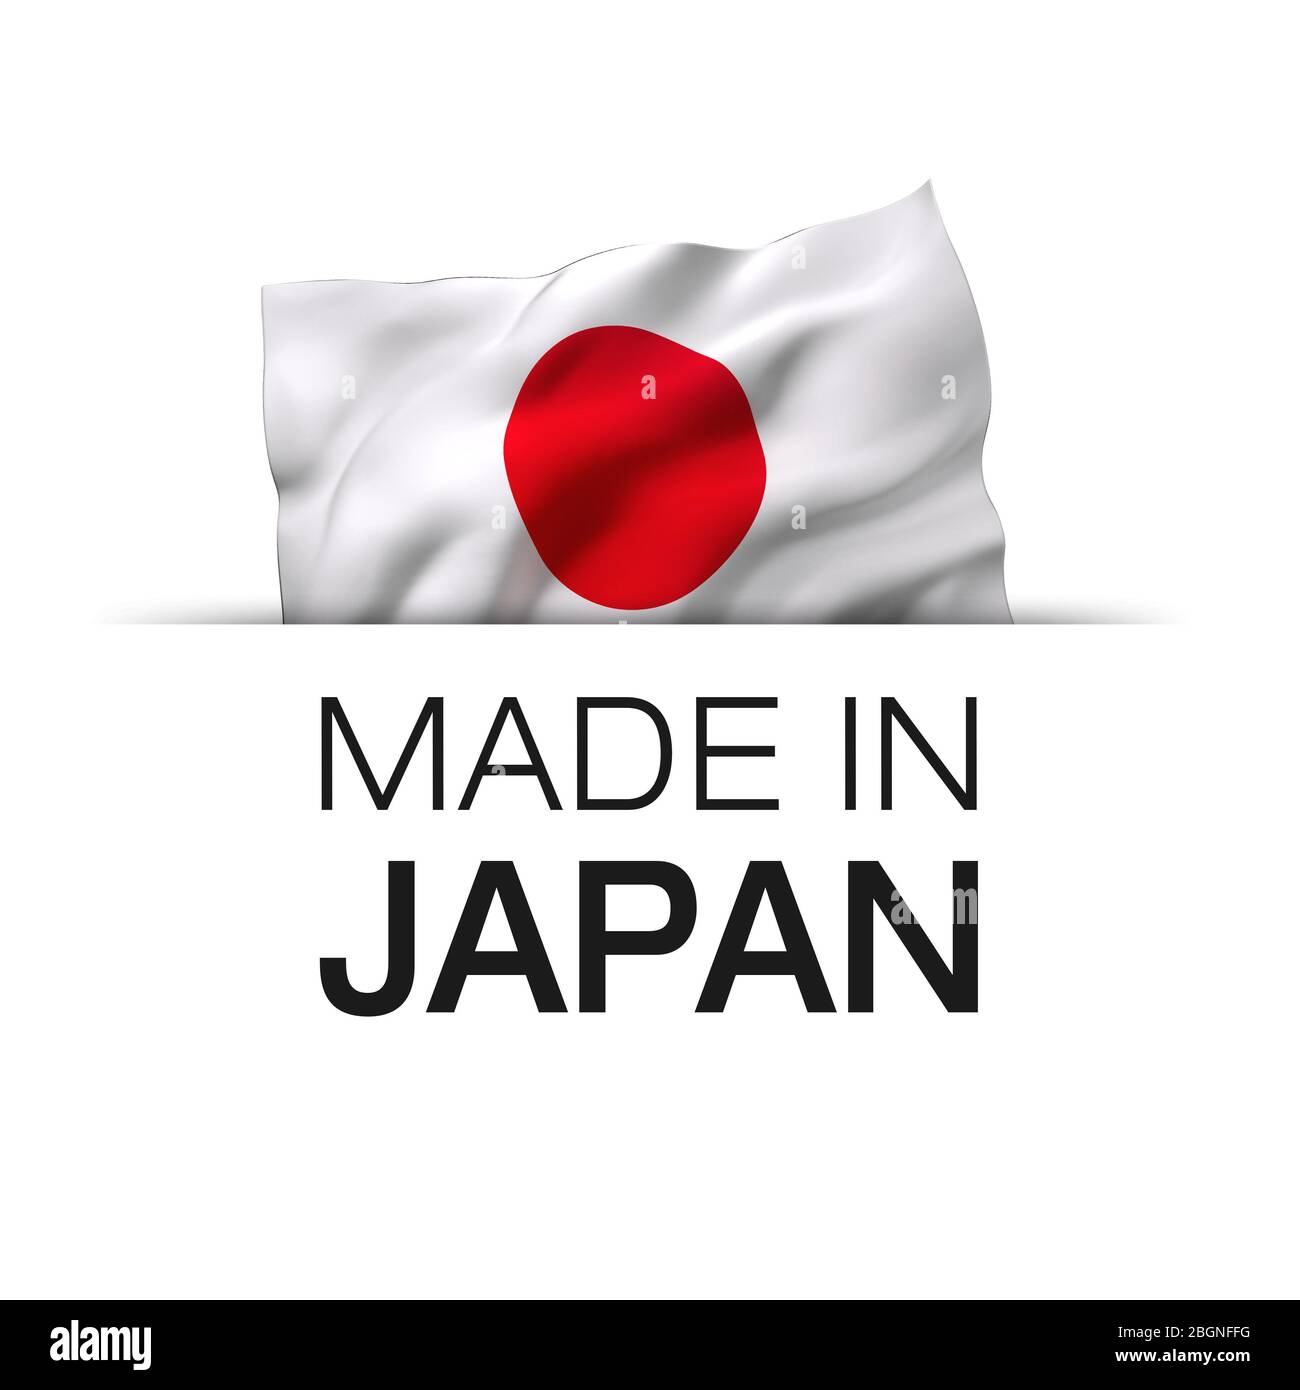 Made in Japan - Guarantee label with a waving Japanese flag. Stock Photo